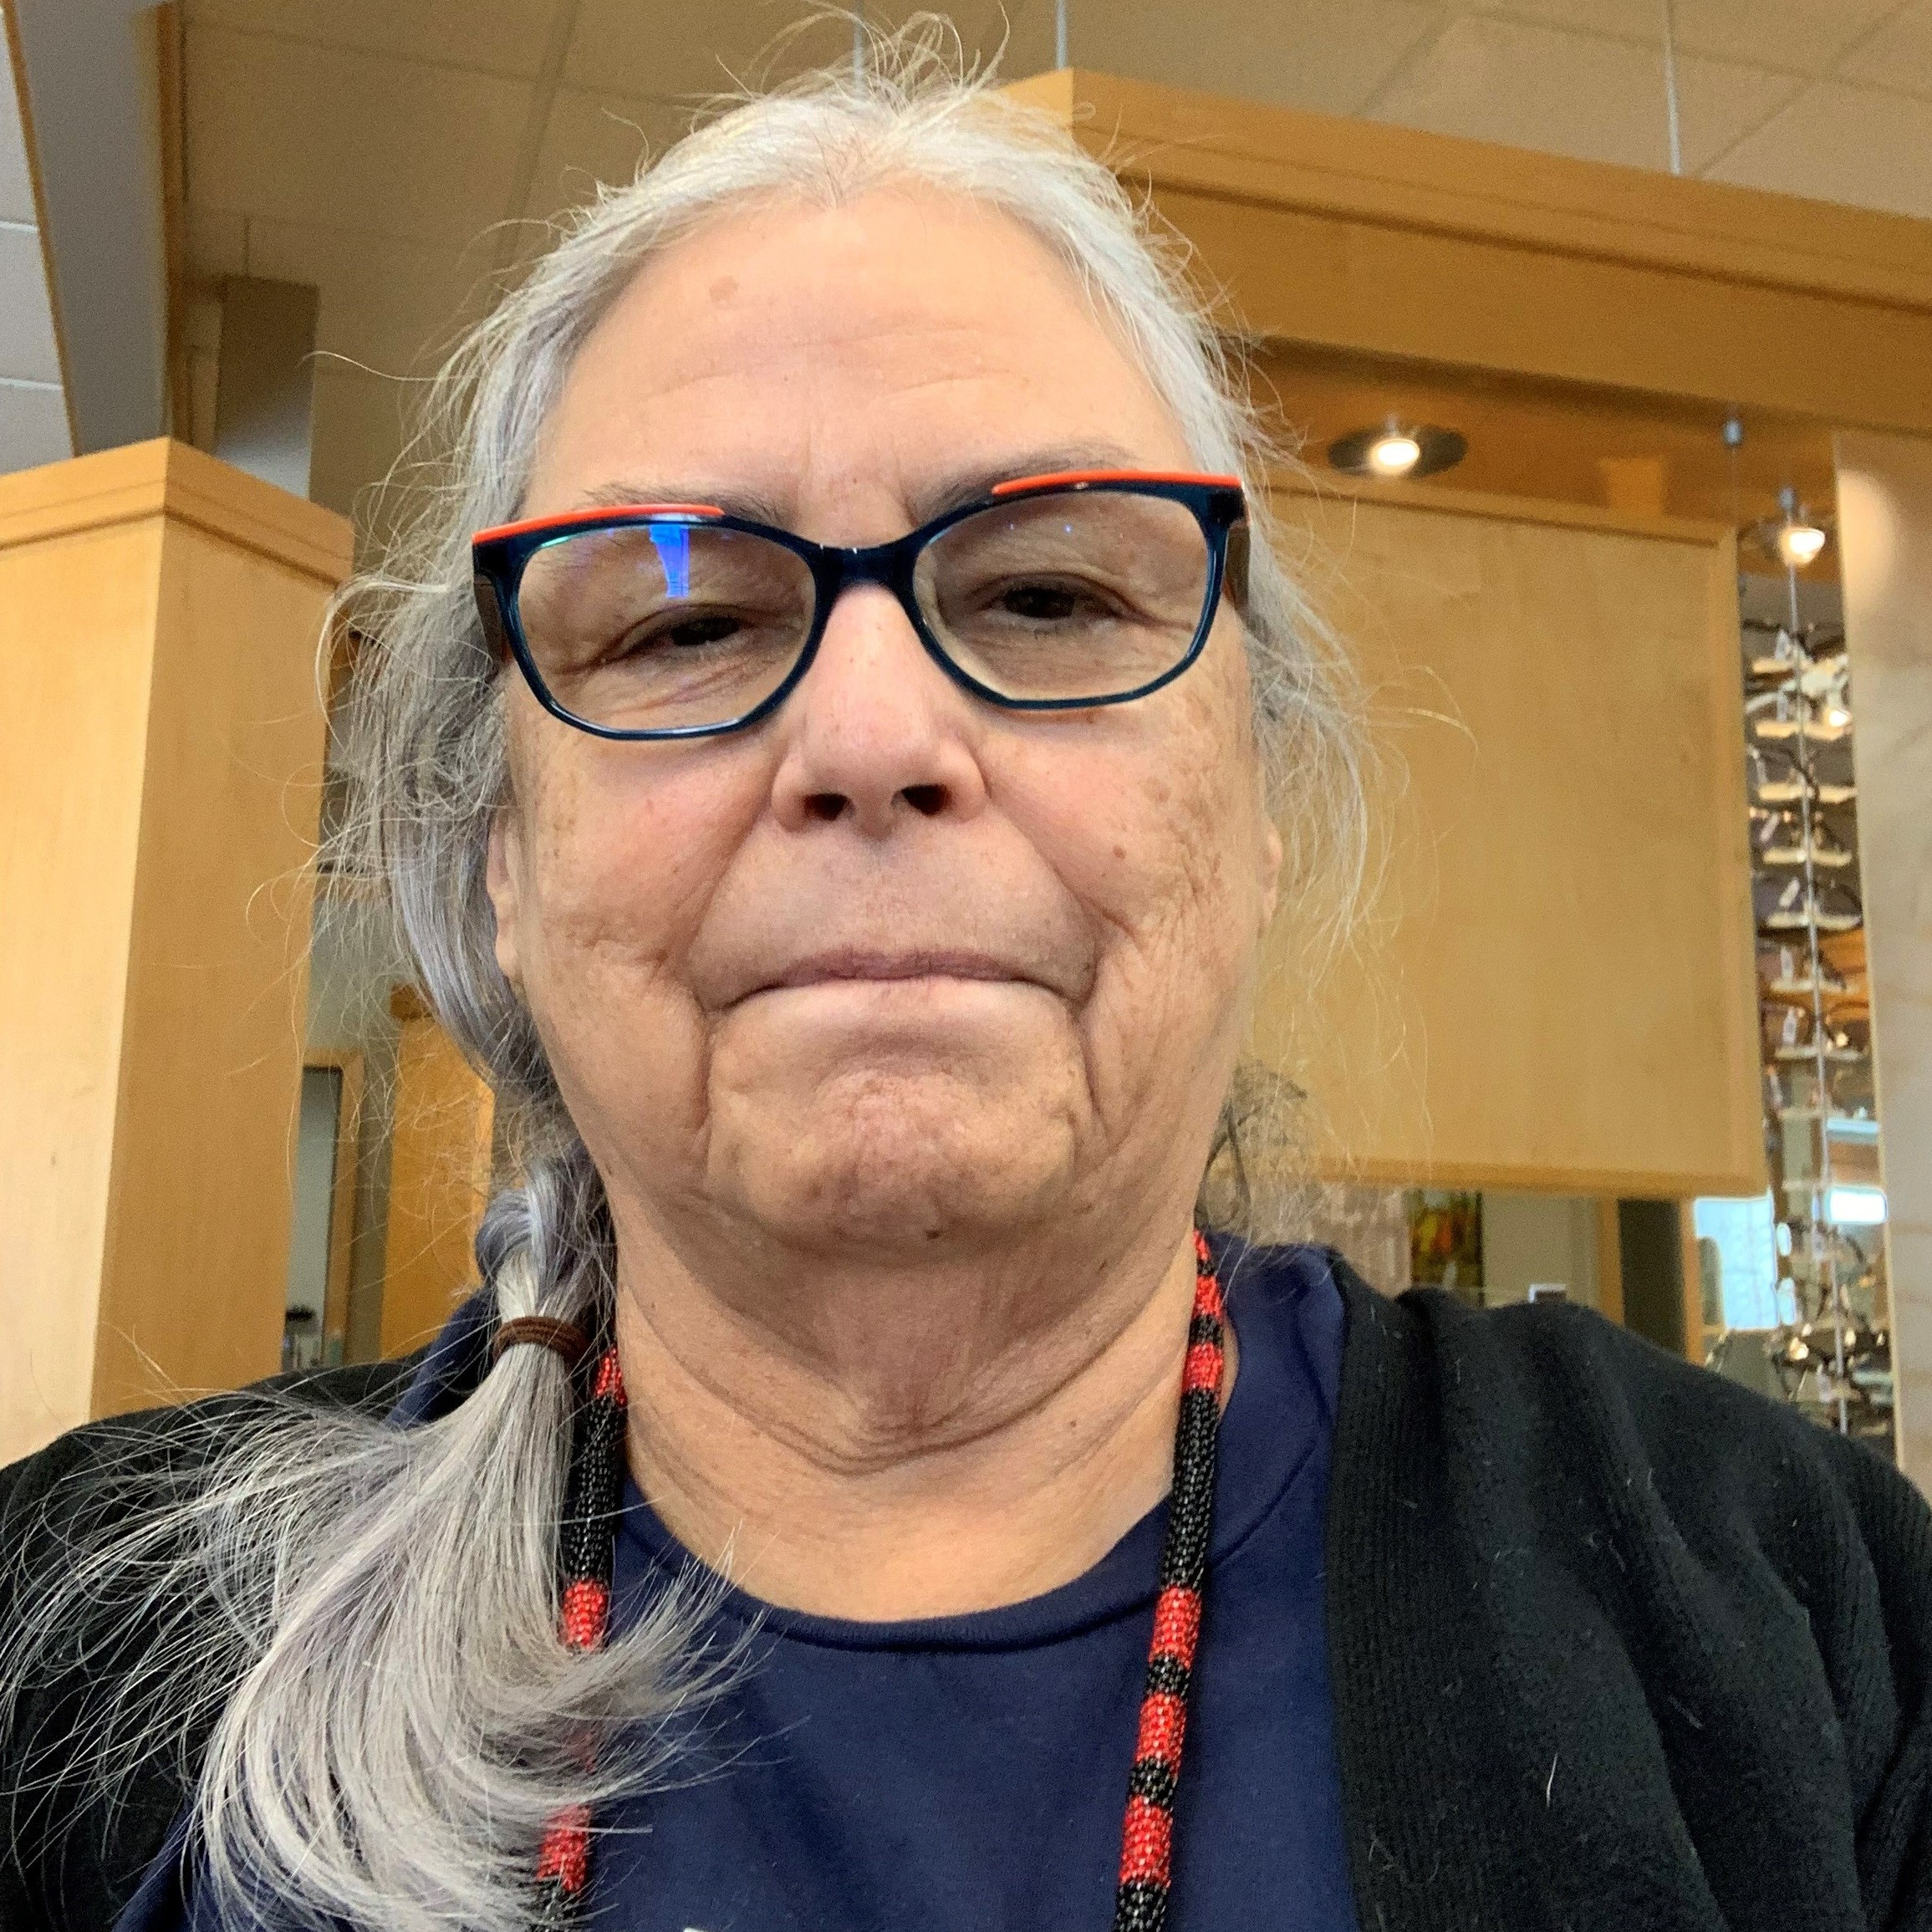 Ruth Cuthand - Indigenous woman wearing glasses and gray hair.